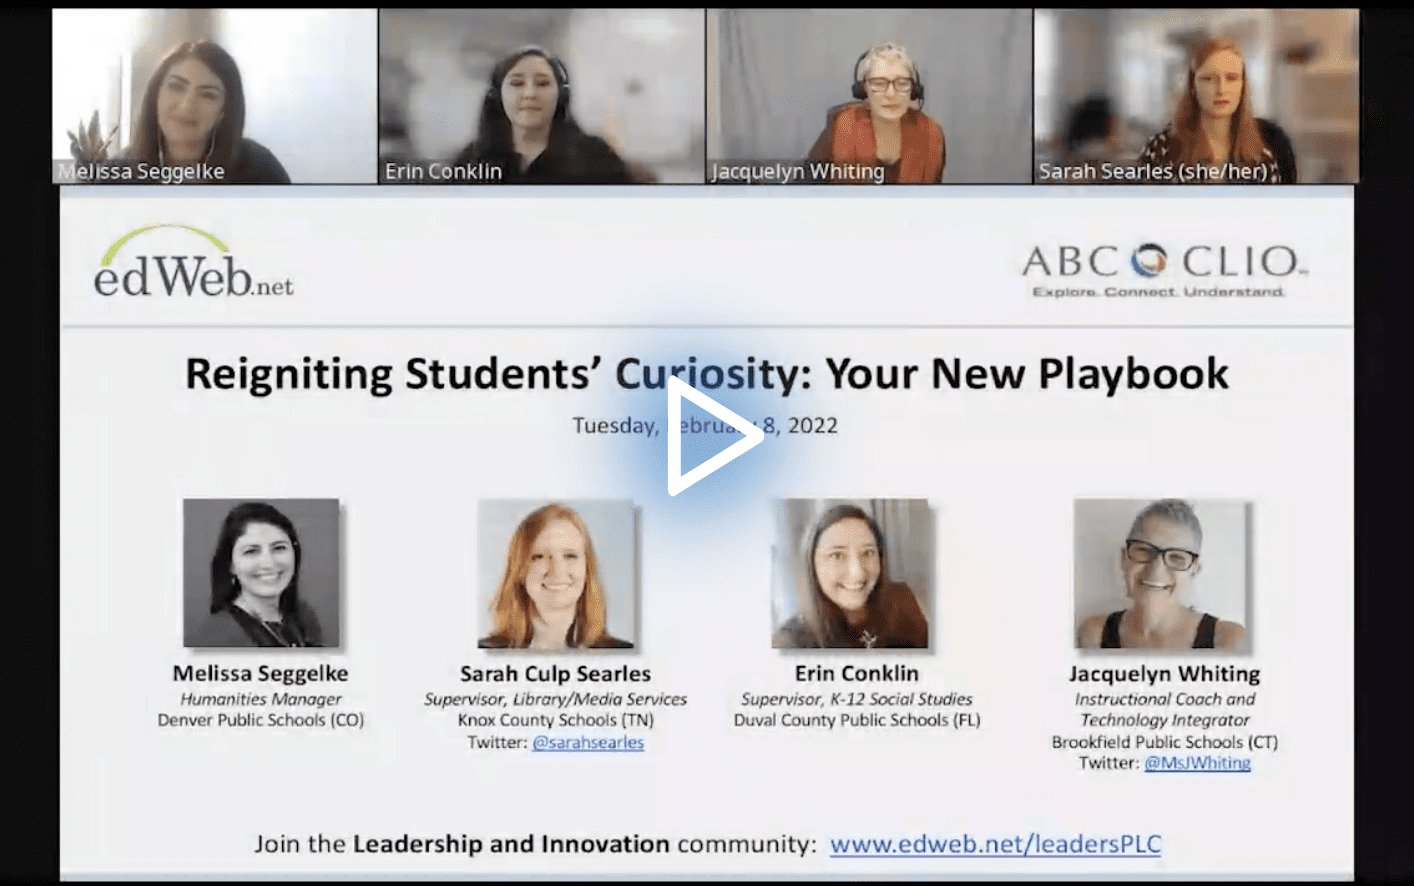 Reigniting Students’ Curiosity: Your New Playbook edLeader Panel recording link